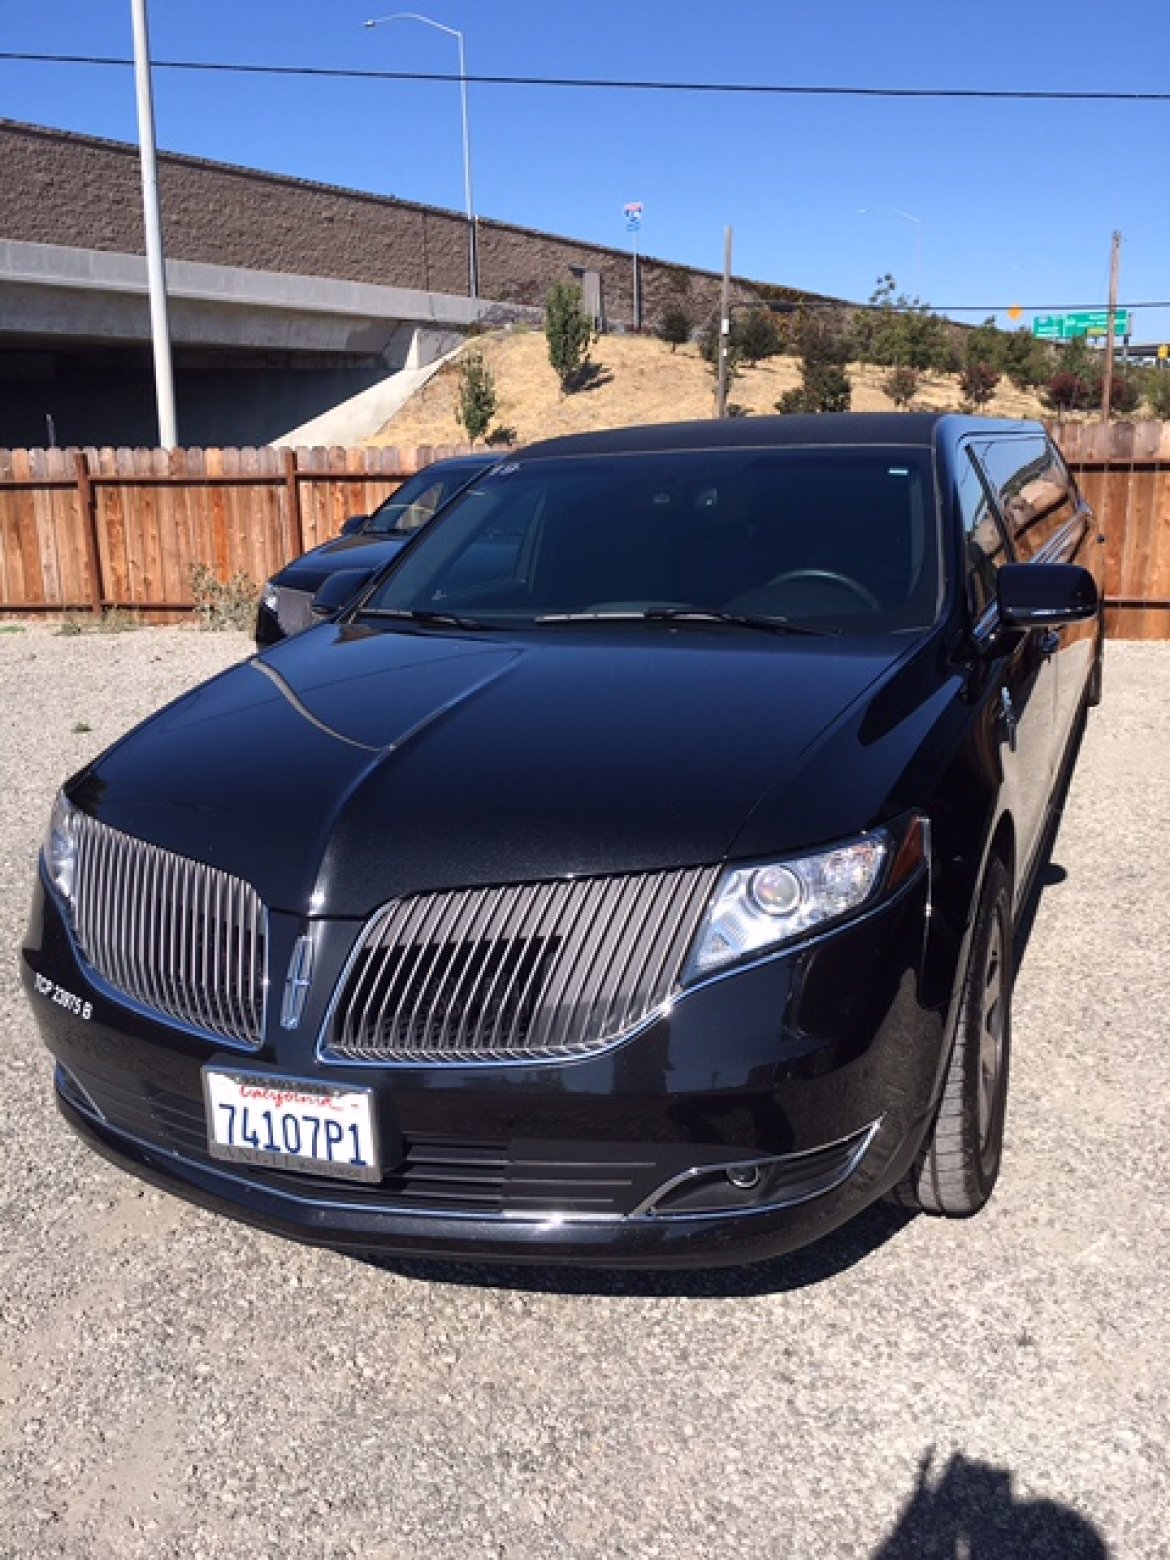 Limousine for sale: 2014 Lincoln MKT by Executive Coach Builders